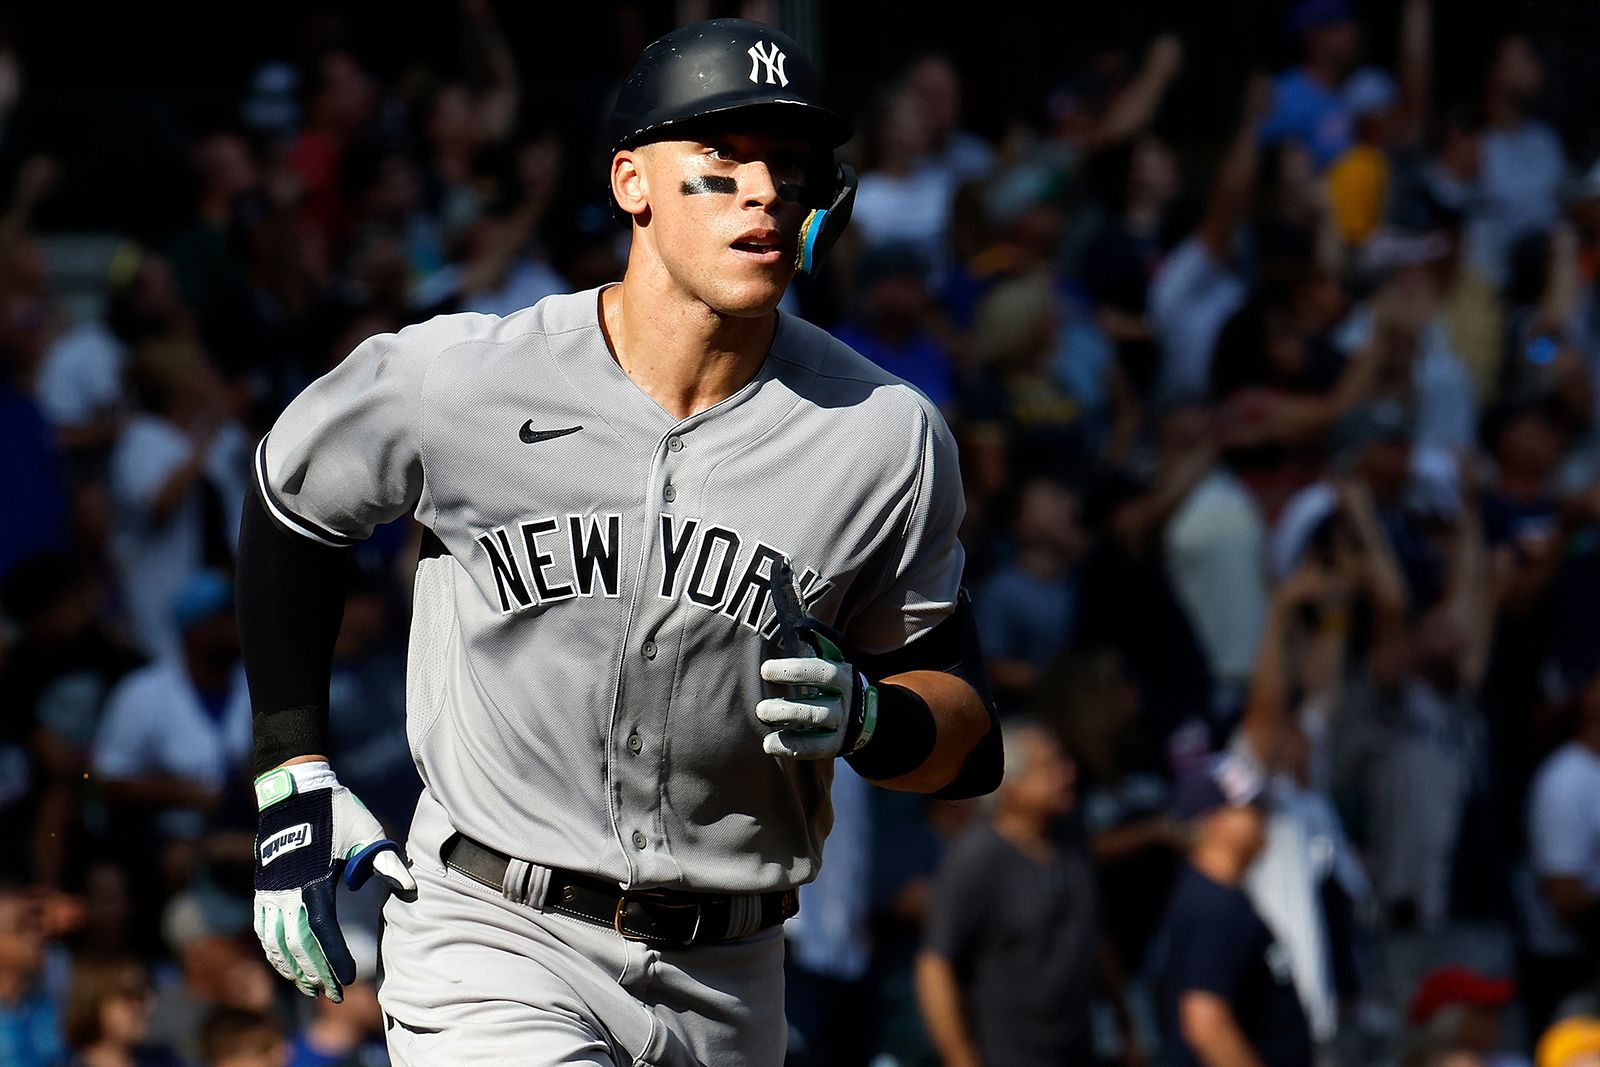 Yankees' Aaron Judge hits 62nd home run  How to get Aaron Judge jersey,  commemorative t-shirt, autograph after breaking Roger Maris' record 